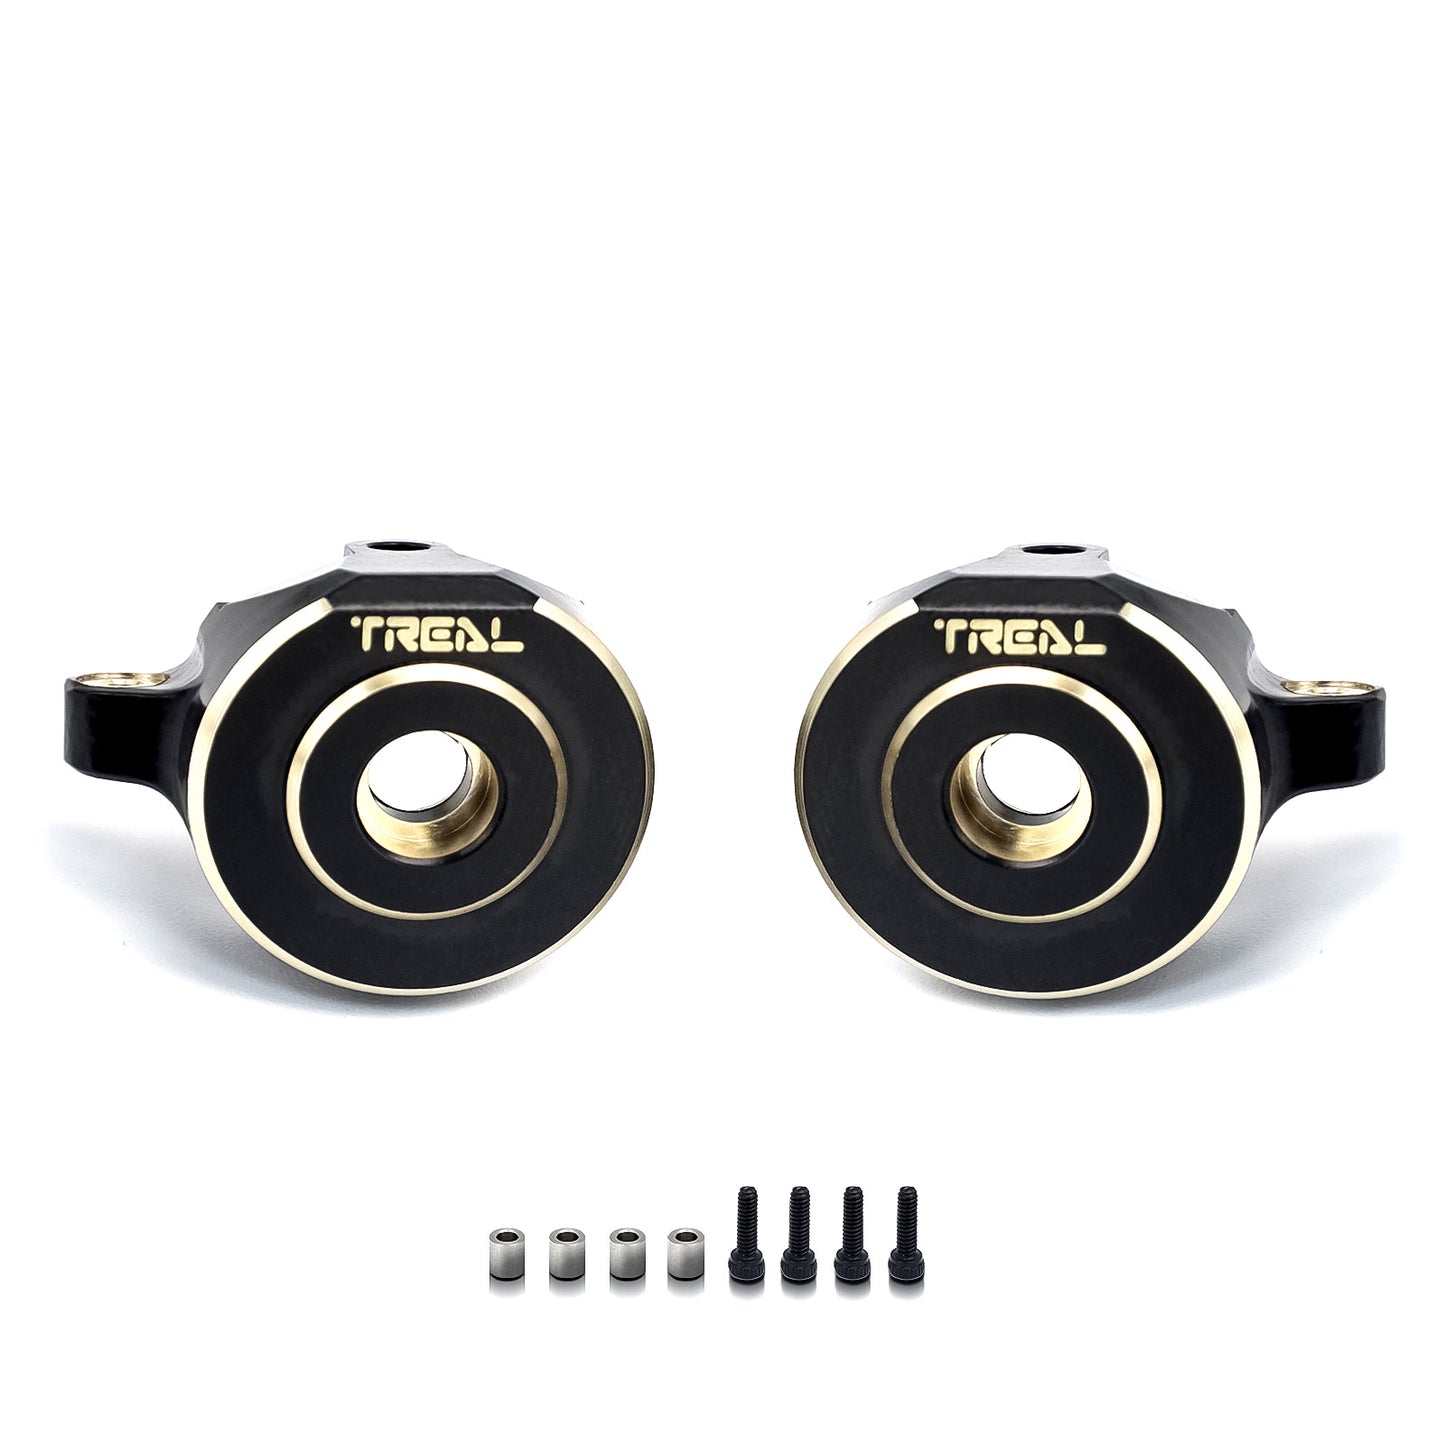 Treal Axial SCX24 Brass Front Steering Knuckles 18g for SCX24 Deadbolt C10 Betty Gladiator Bronco